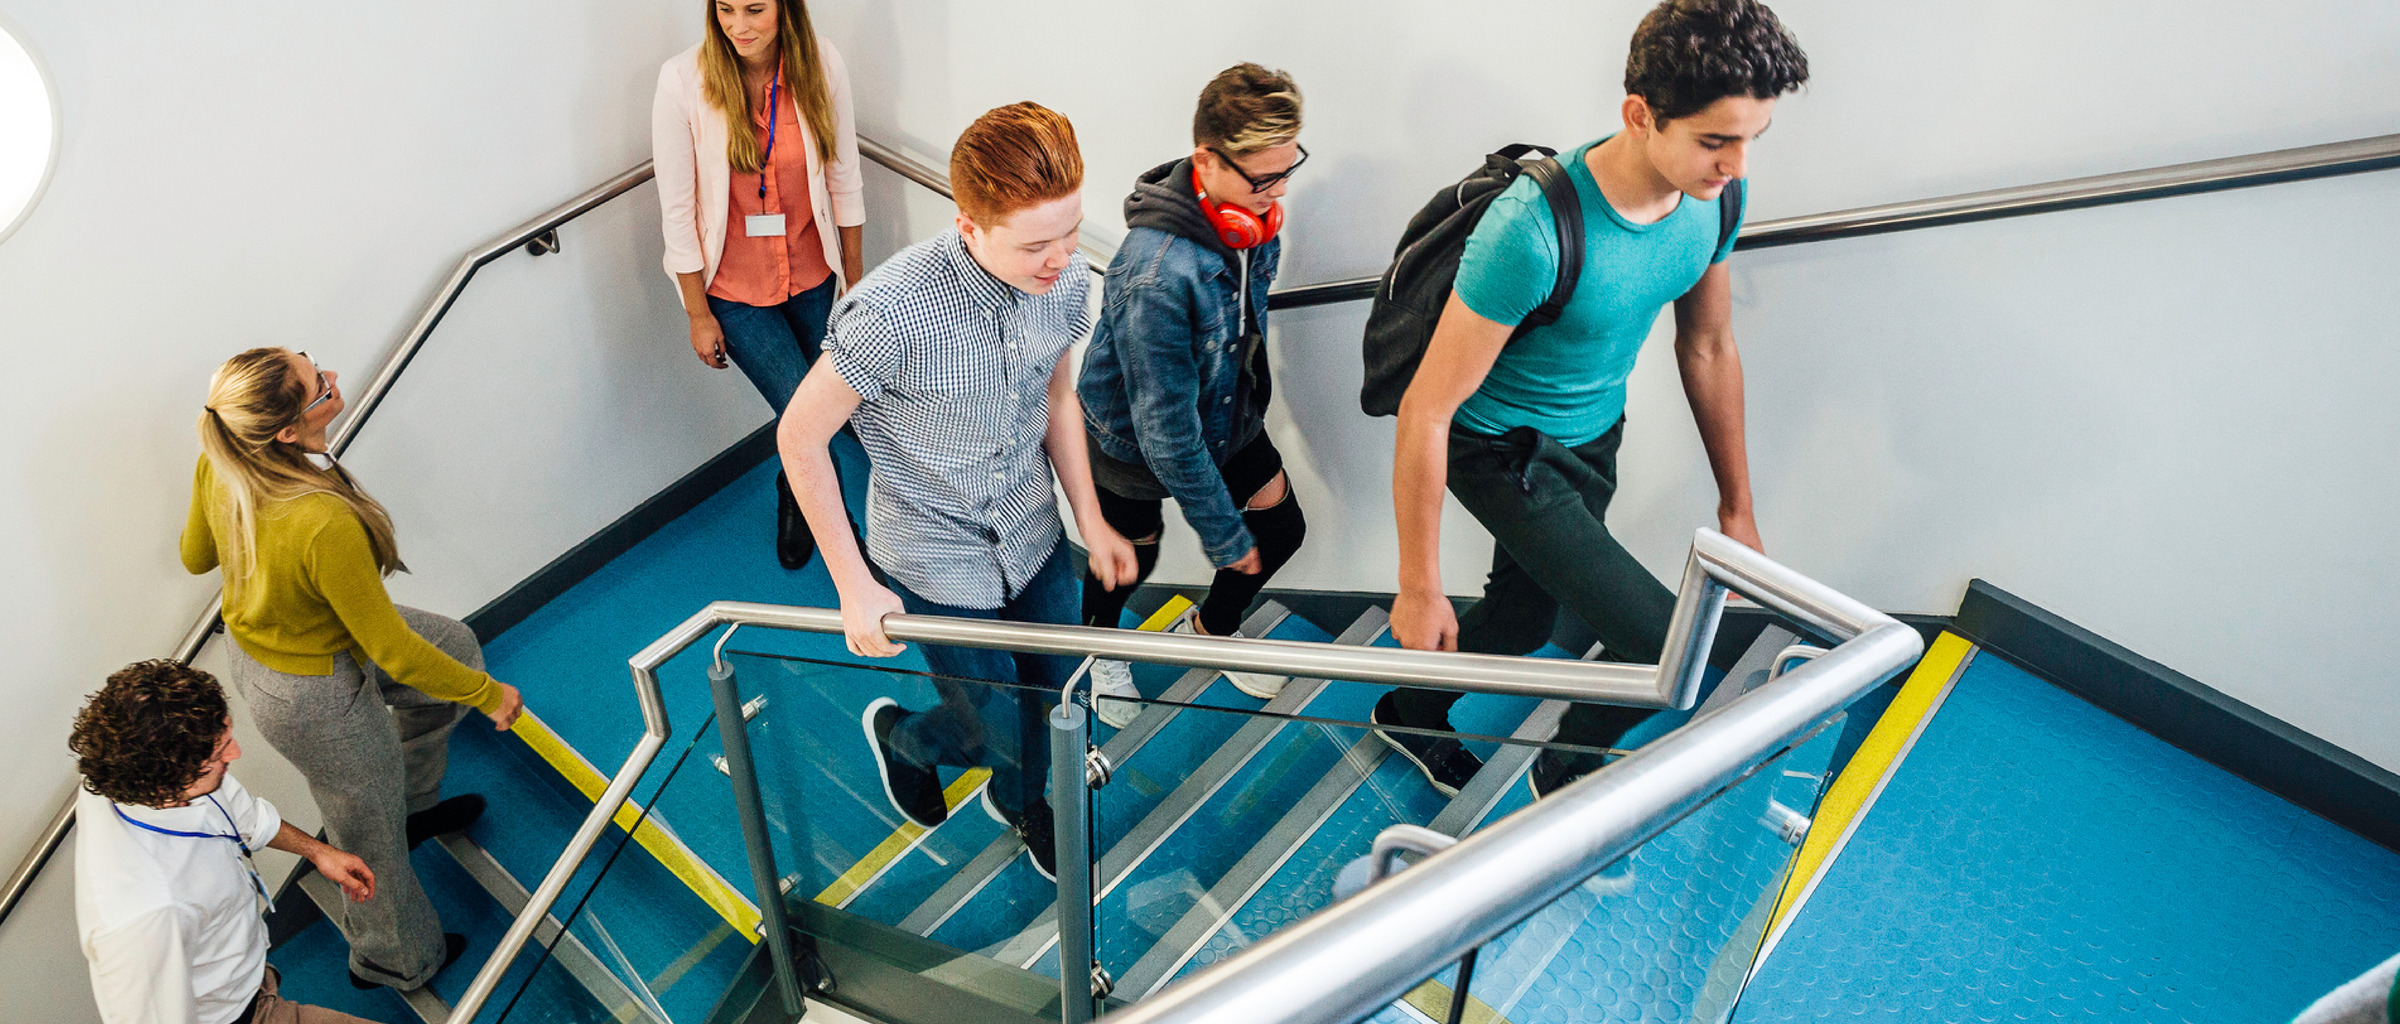 Group of students and teachers walking up a staircase.